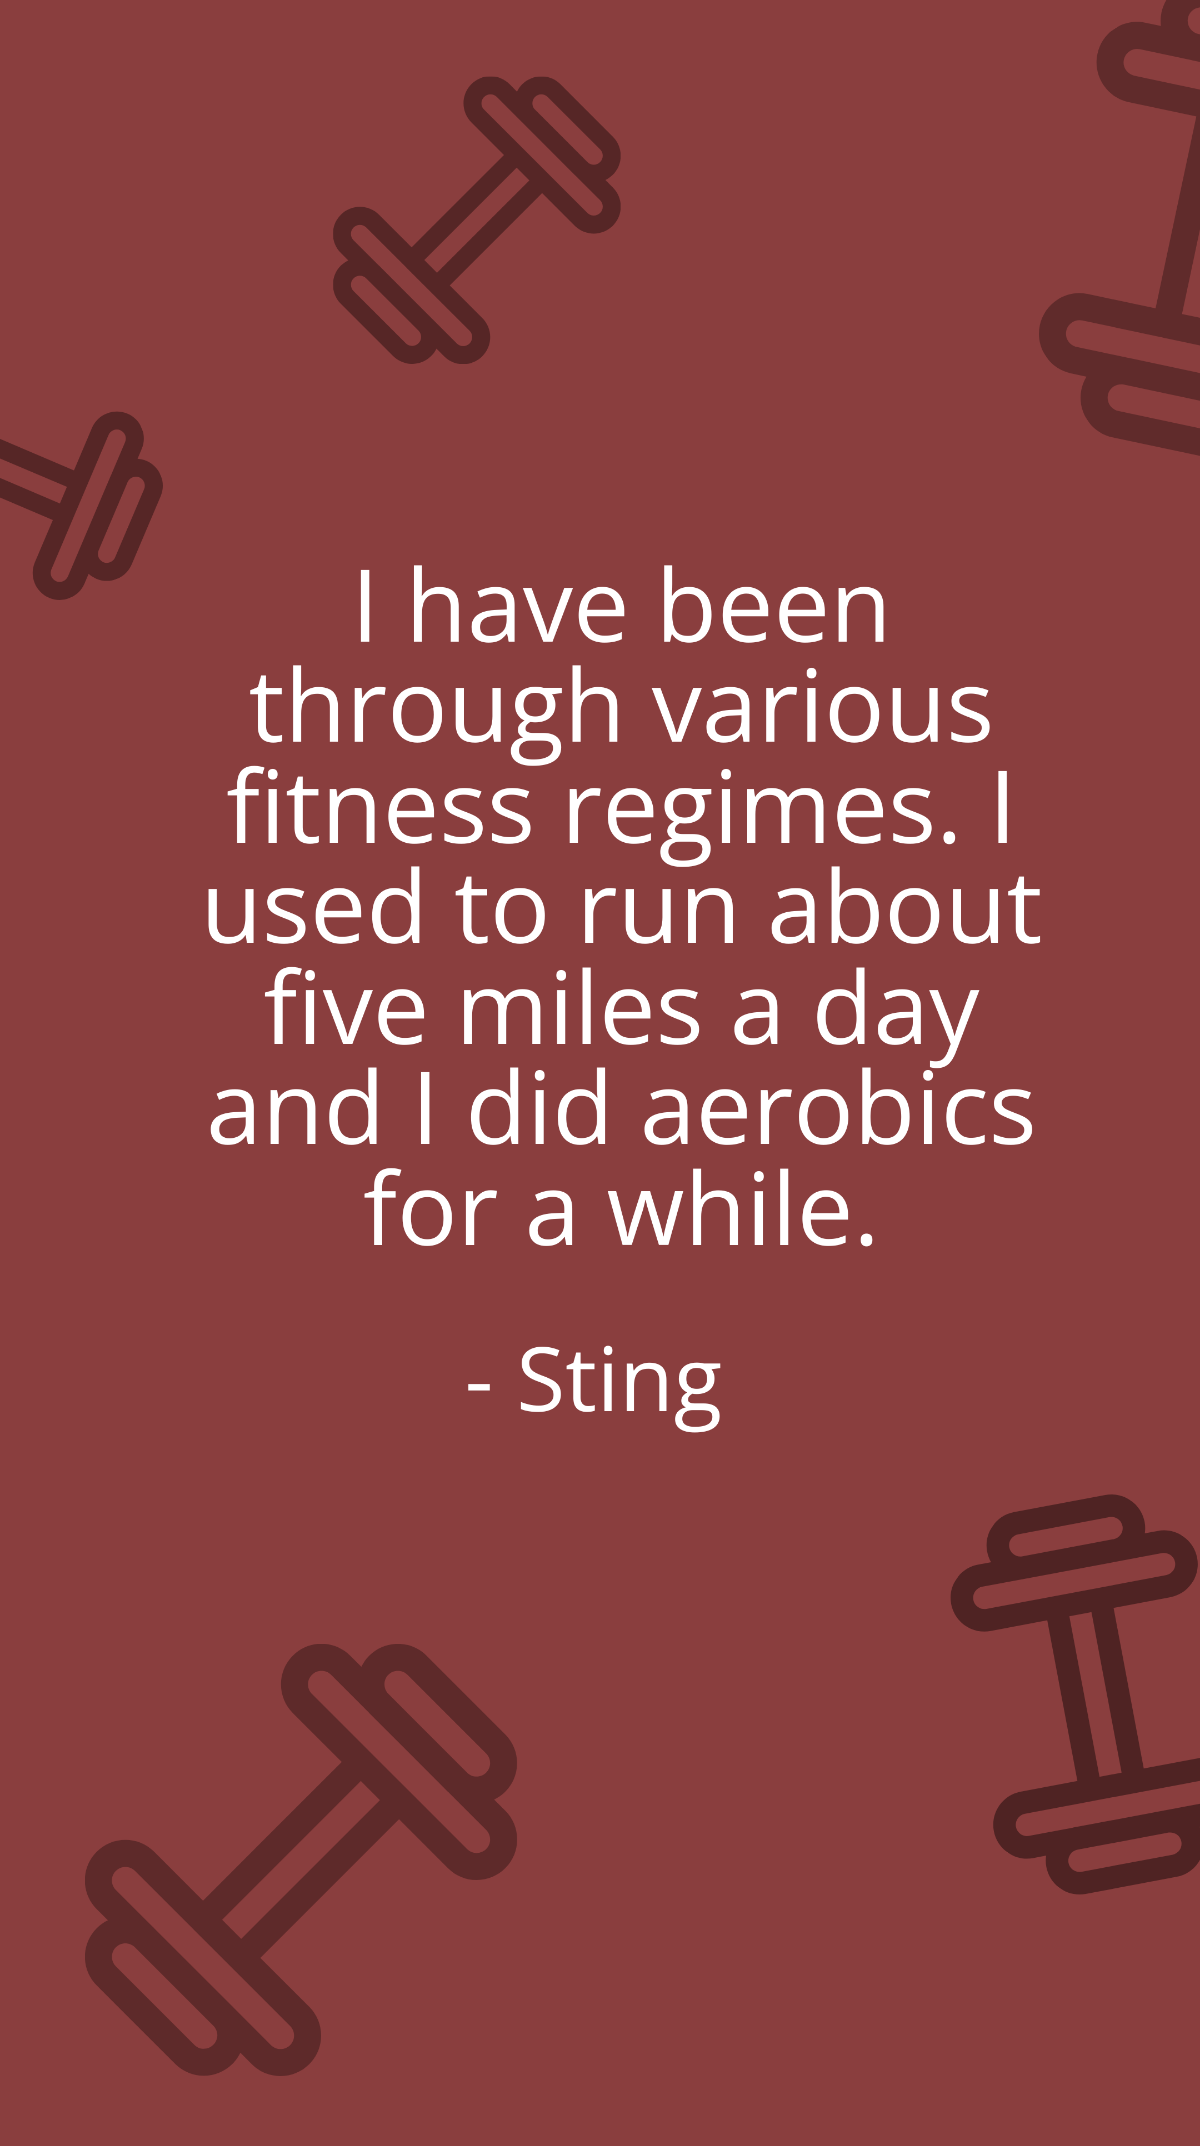 Sting - I have been through various fitness regimes. I used to run about five miles a day and I did aerobics for a while. Template